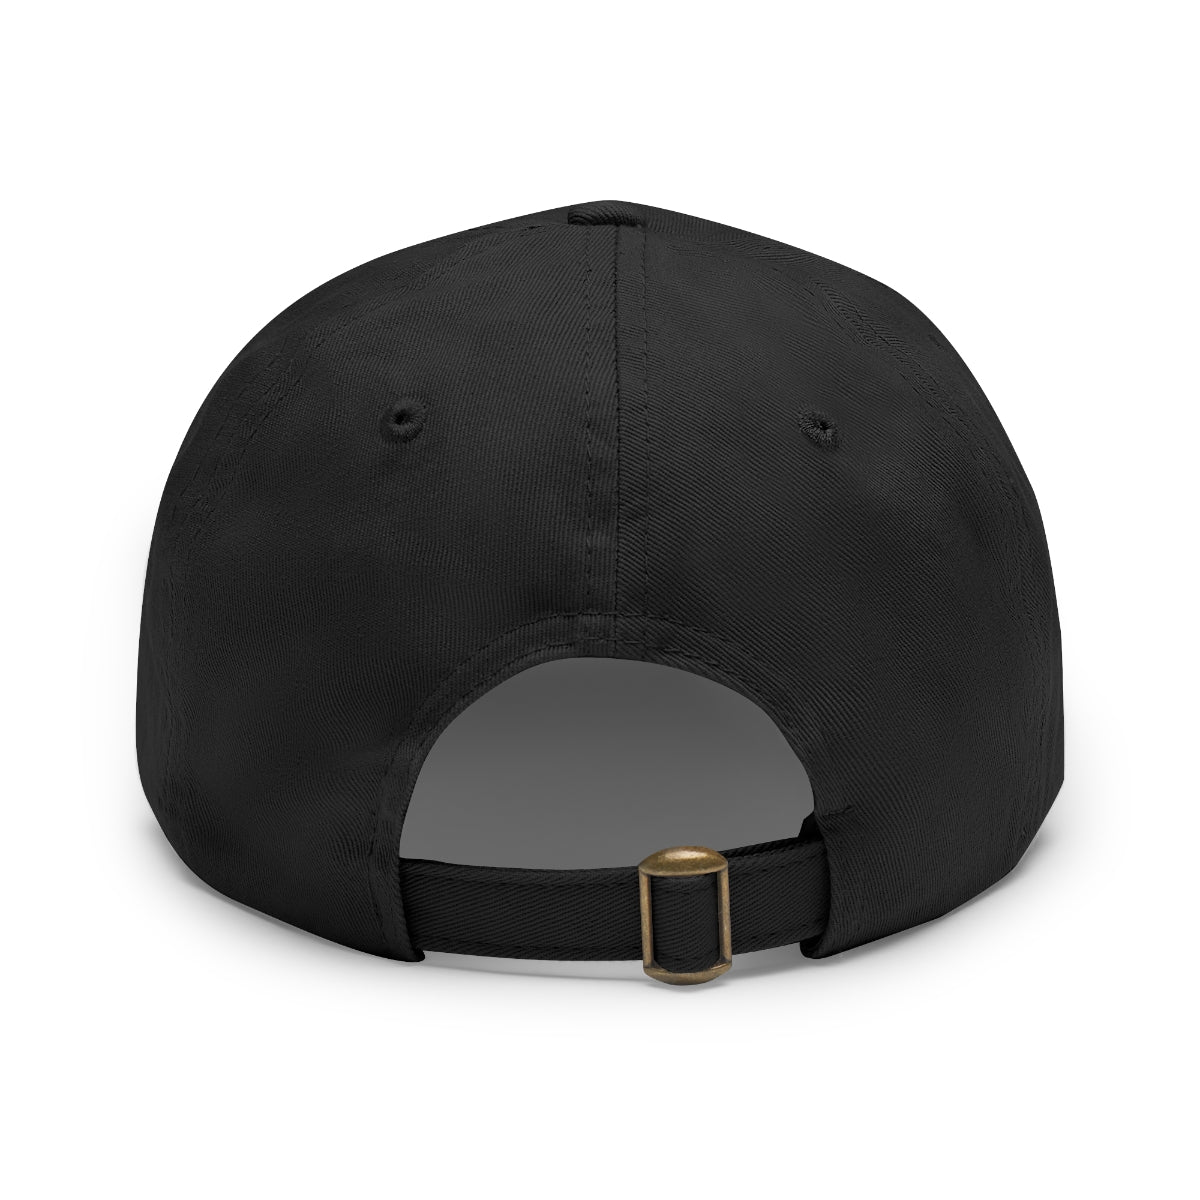 Keep Going Dad Hat with Leather Patch